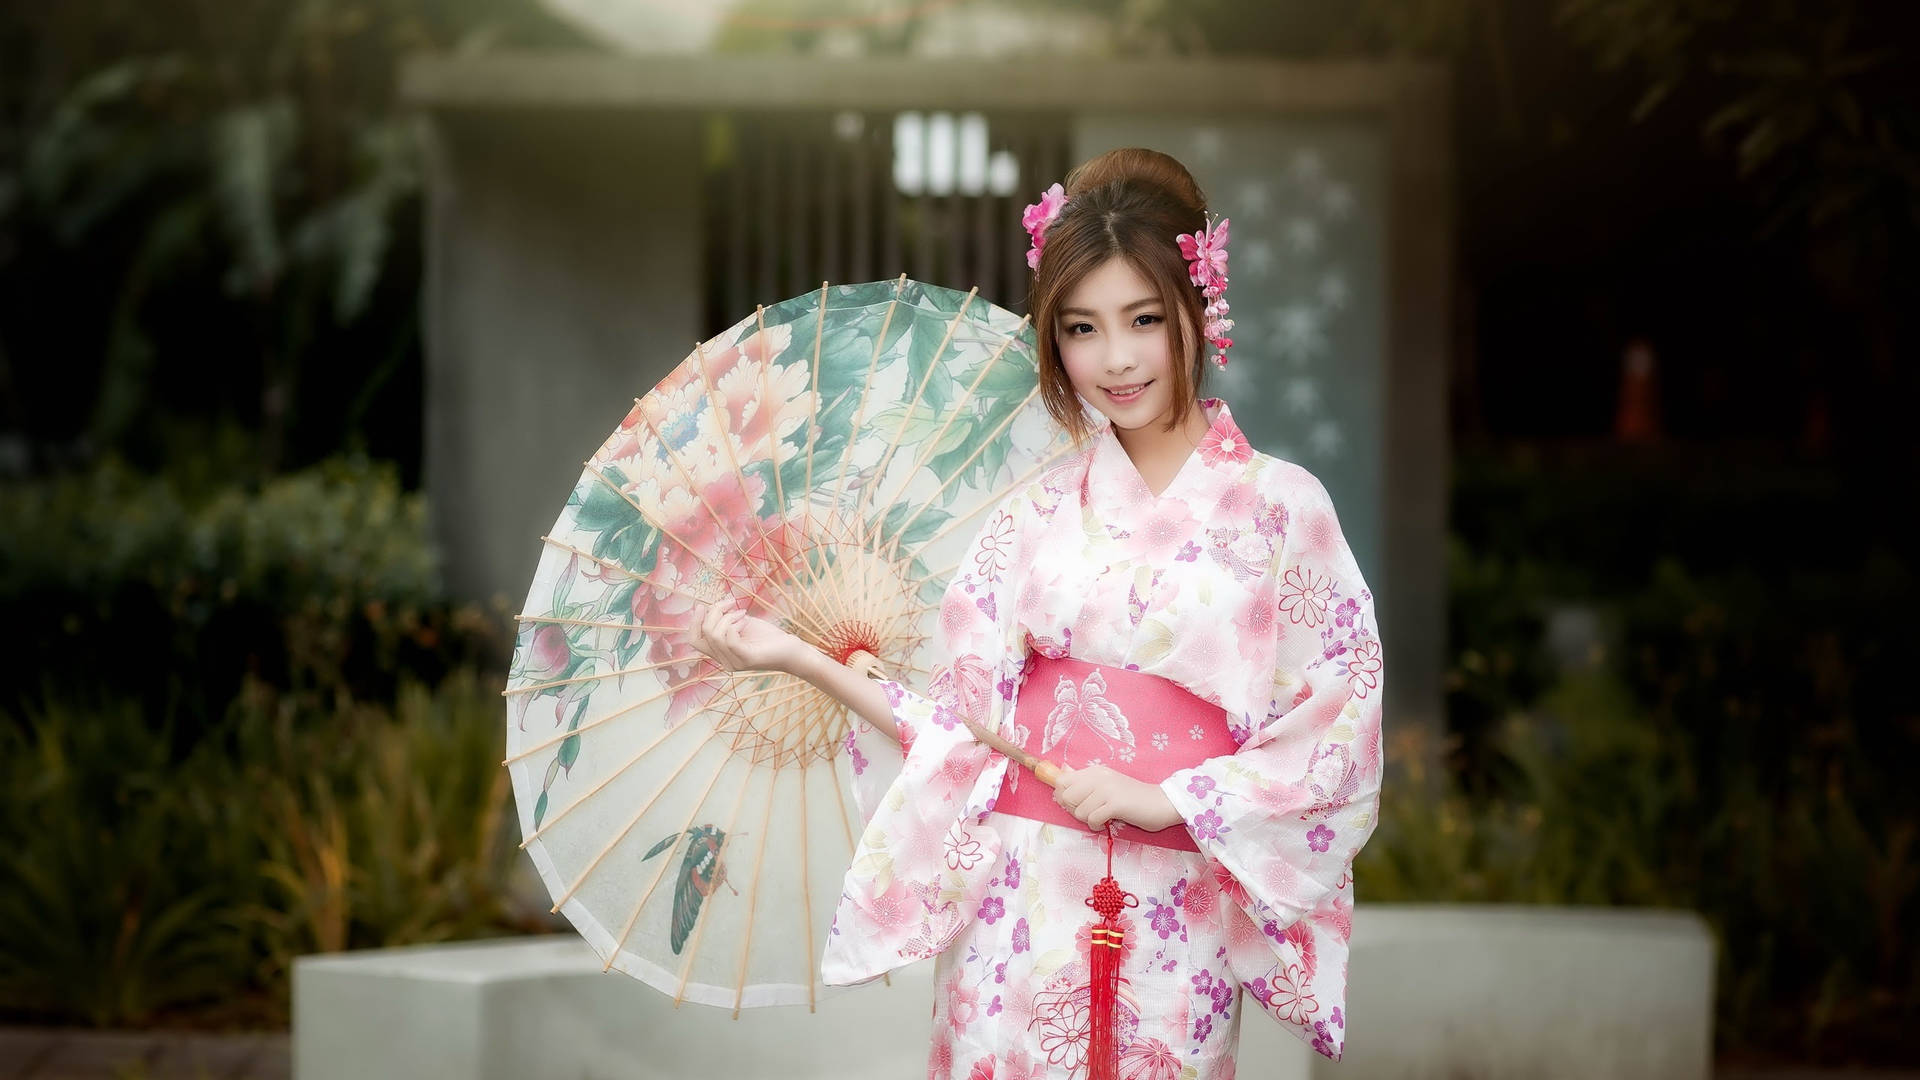 Japanese Girl With Floral Parasol Picture